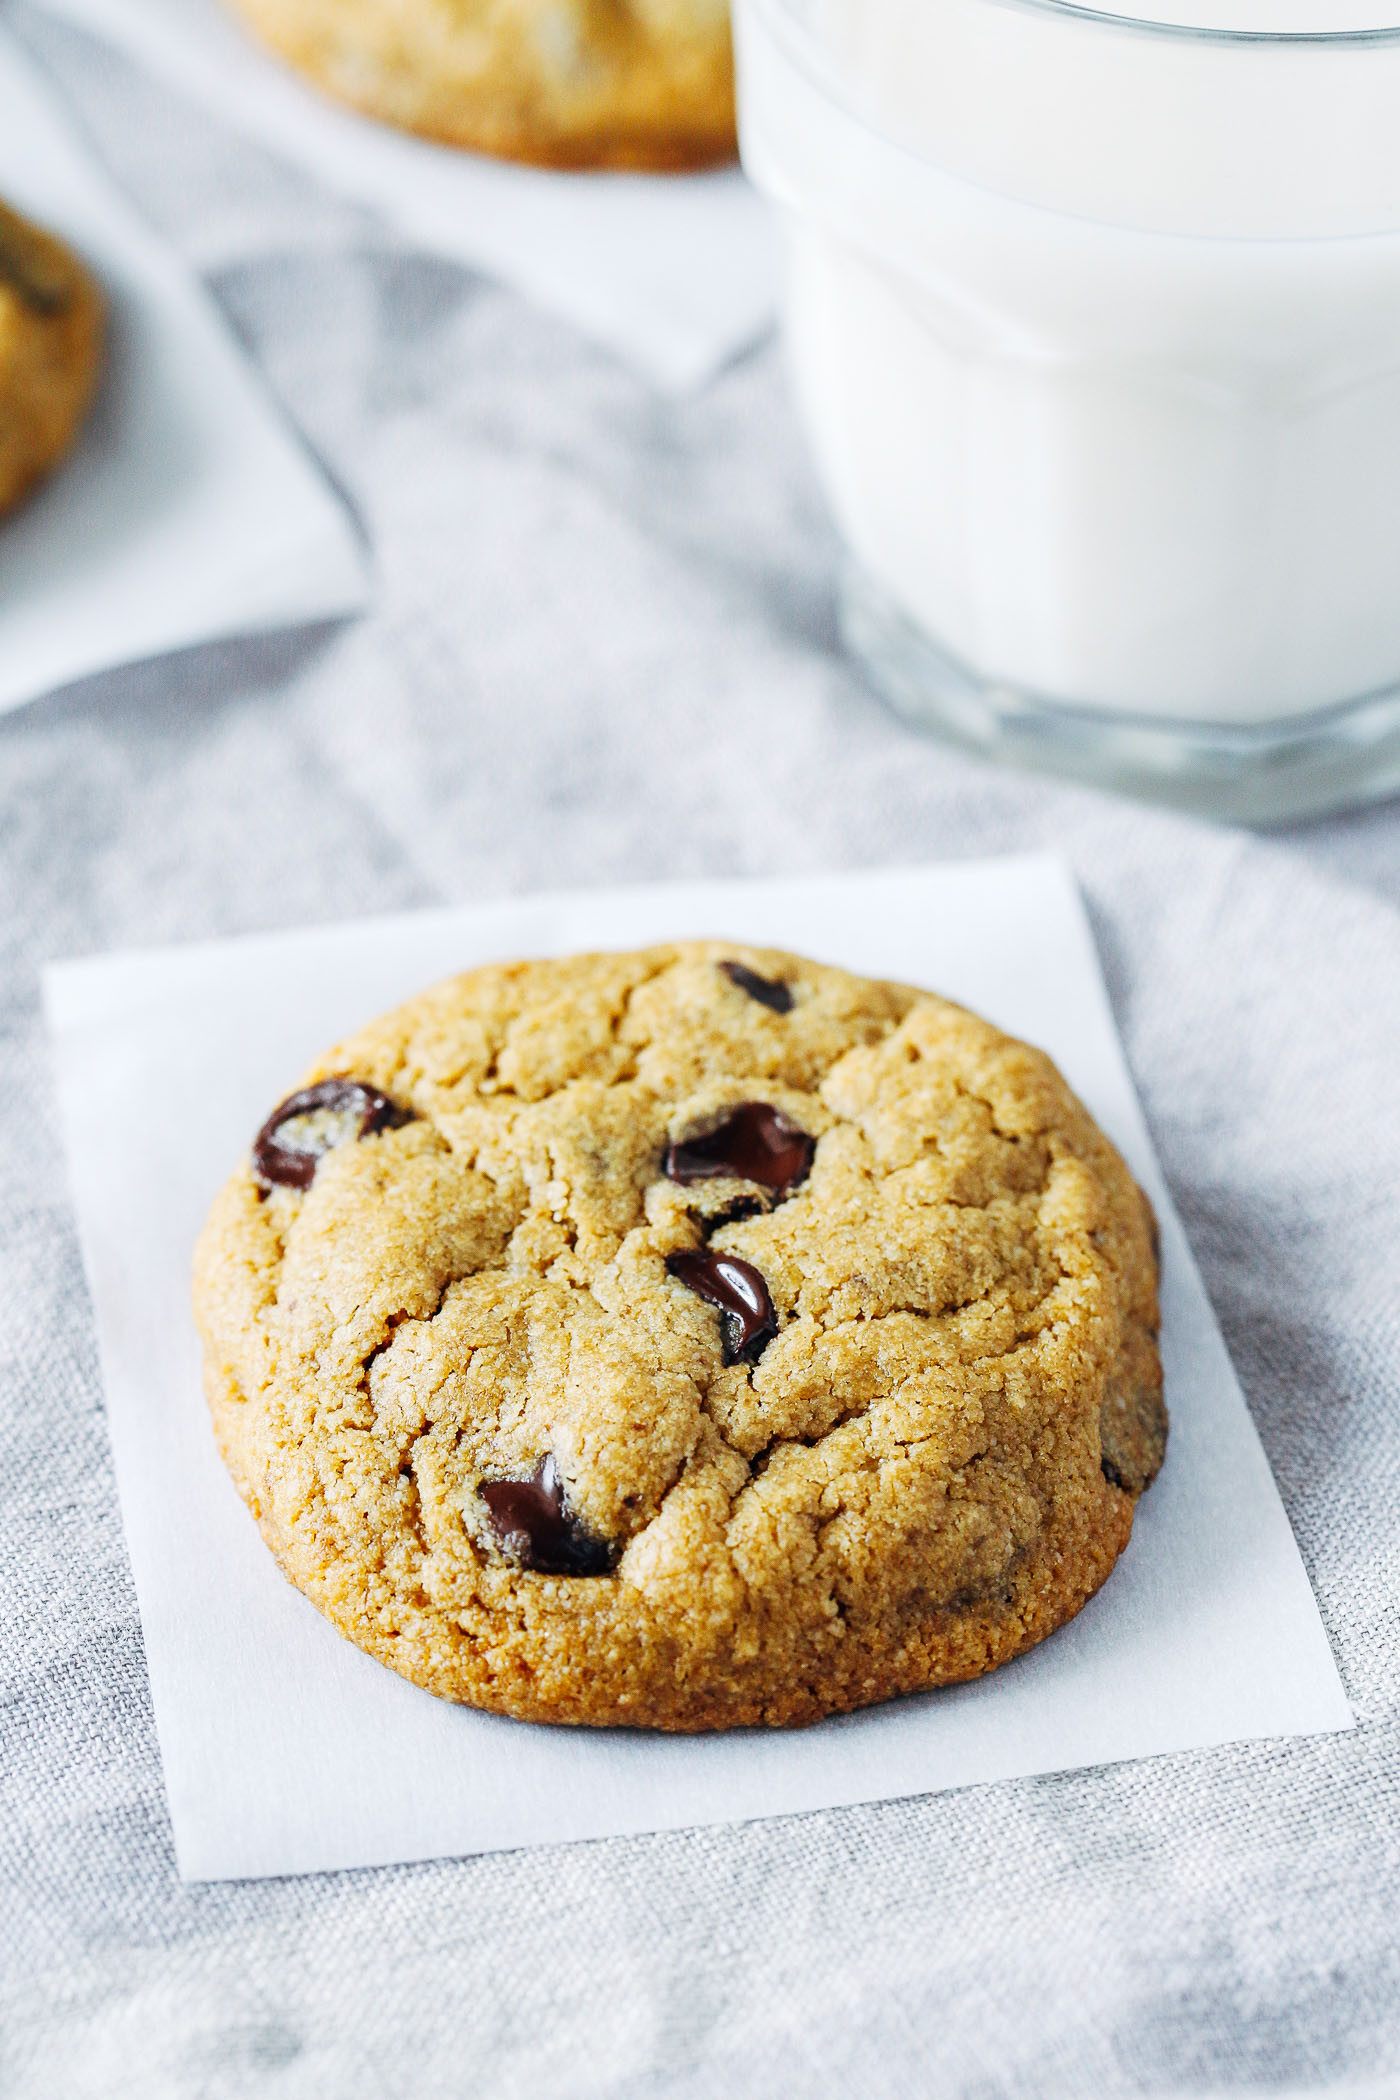 Gluten Free Dairy Free Cookie Recipes Awesome the Best Vegan and Gluten Free Chocolate Chip Cookies